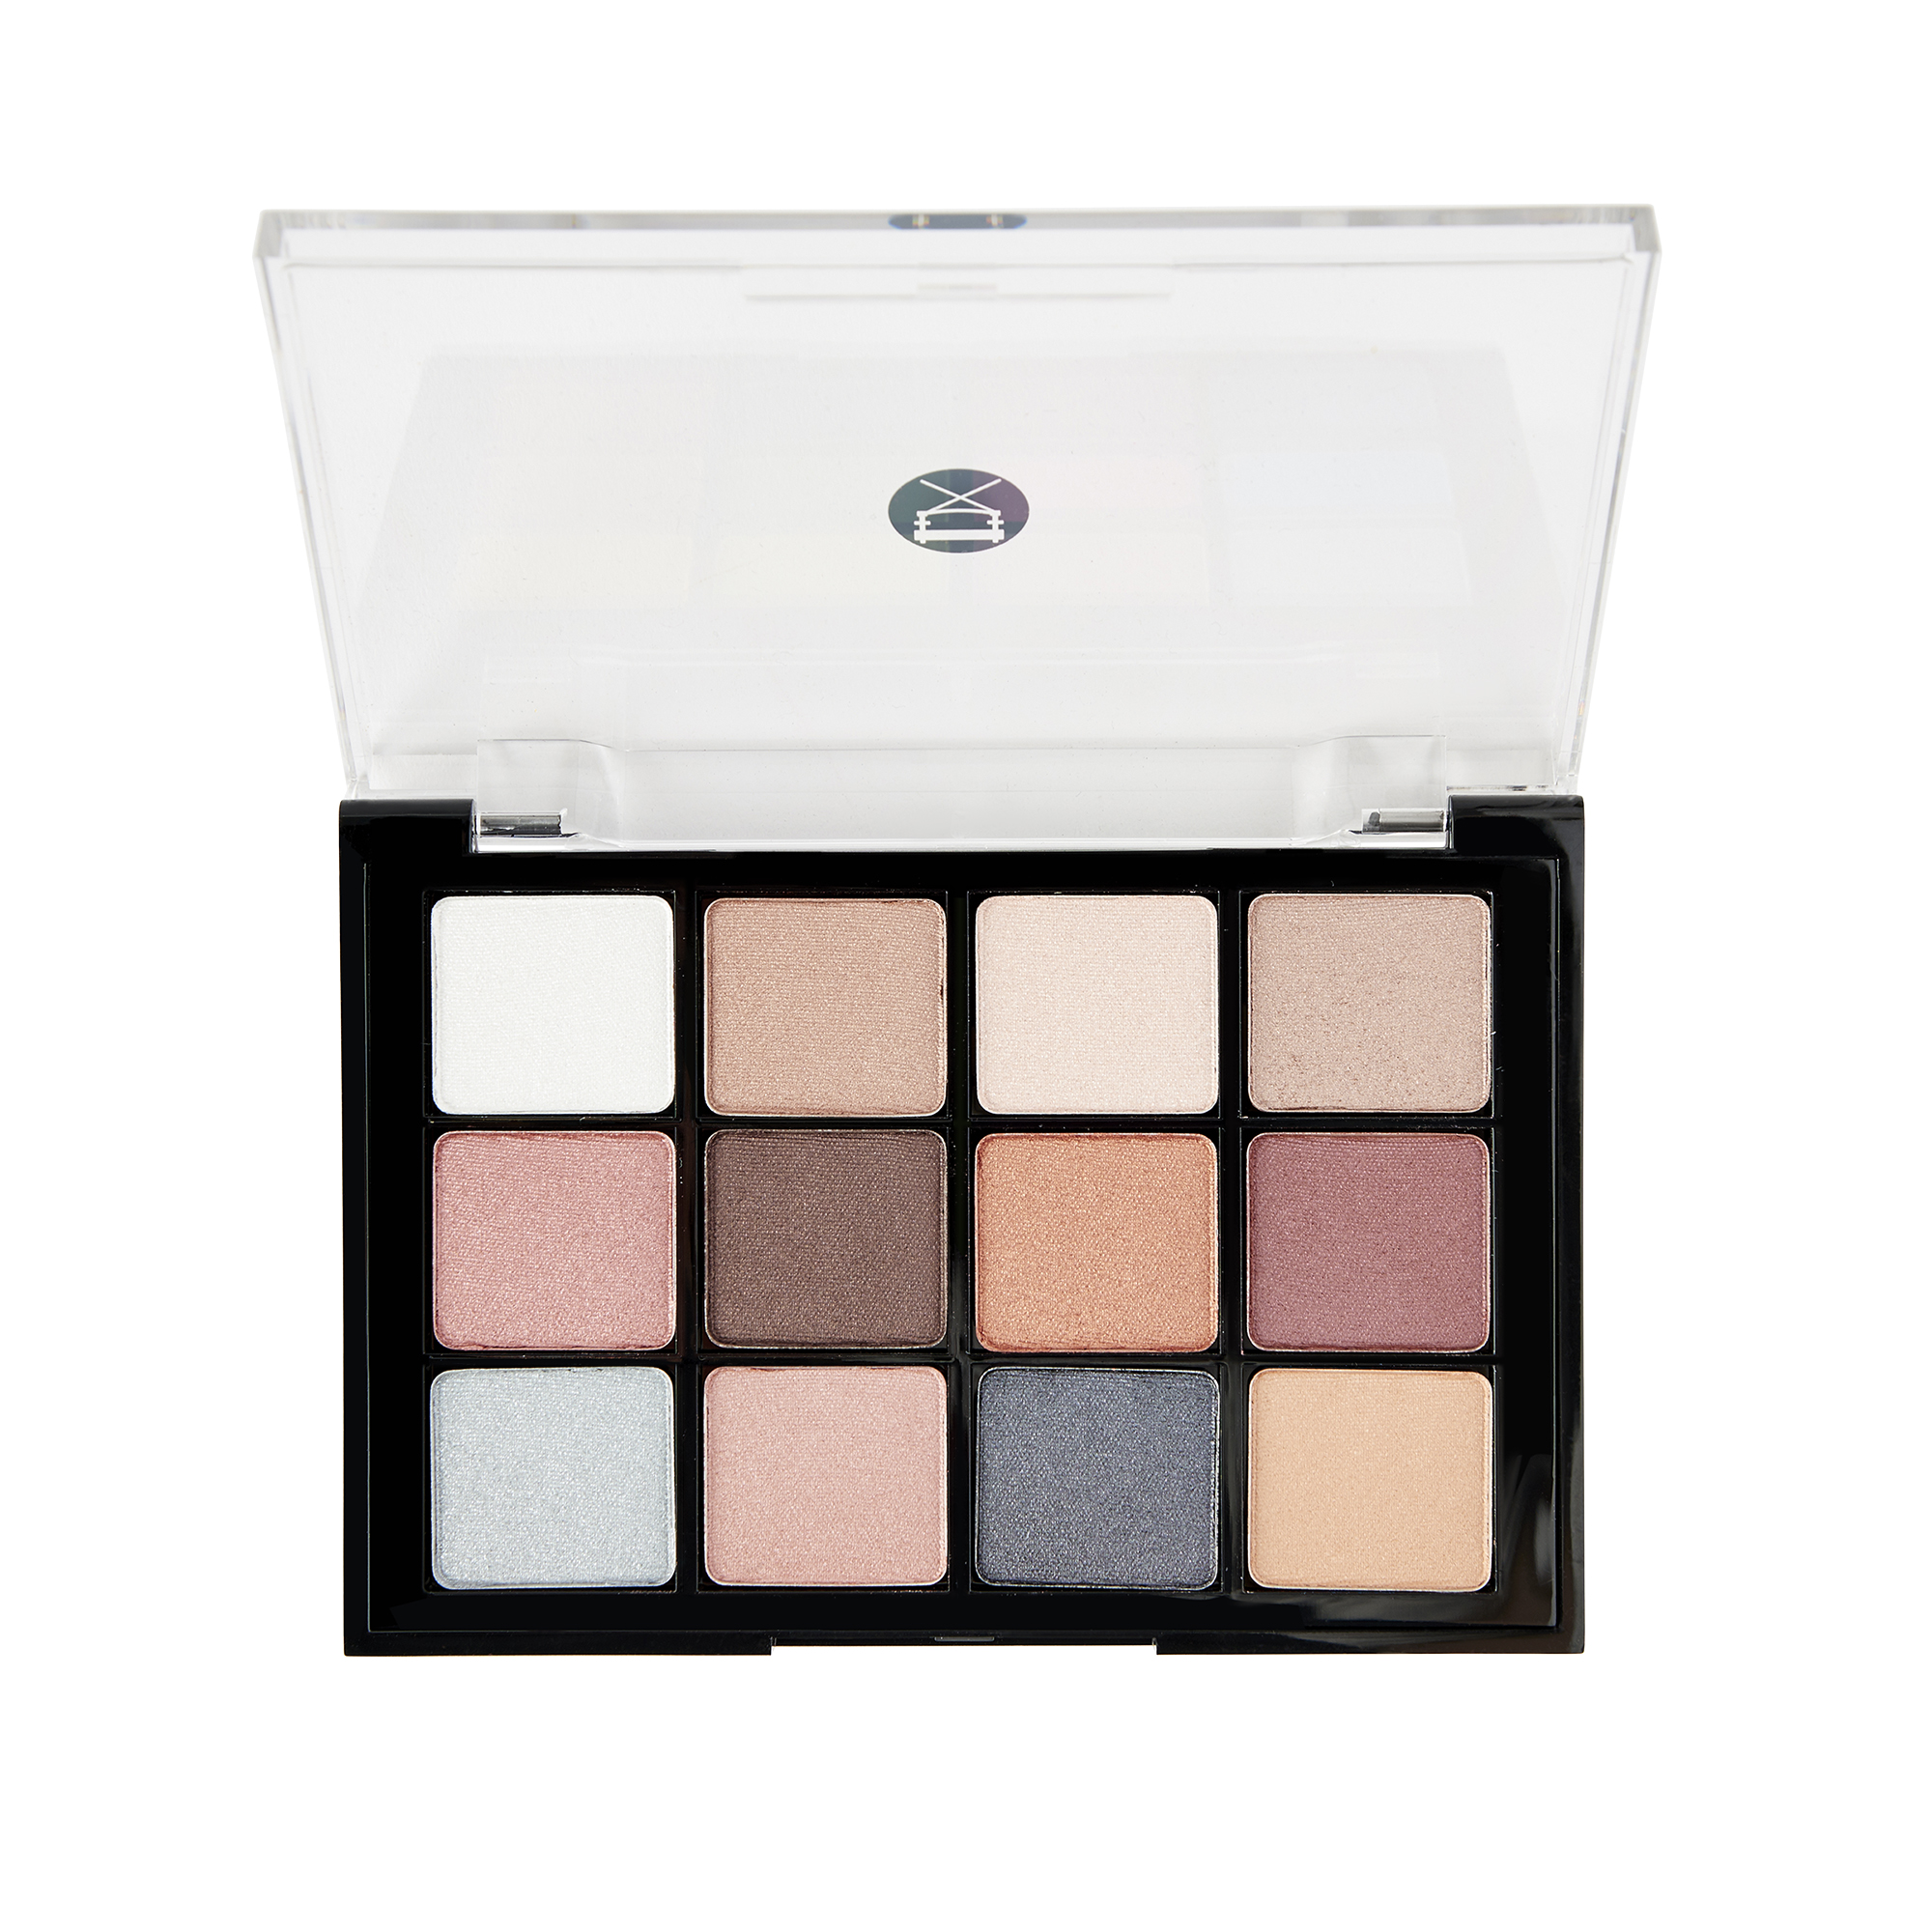 05 Sultry Muse Shimmer Eyeshadow Palette